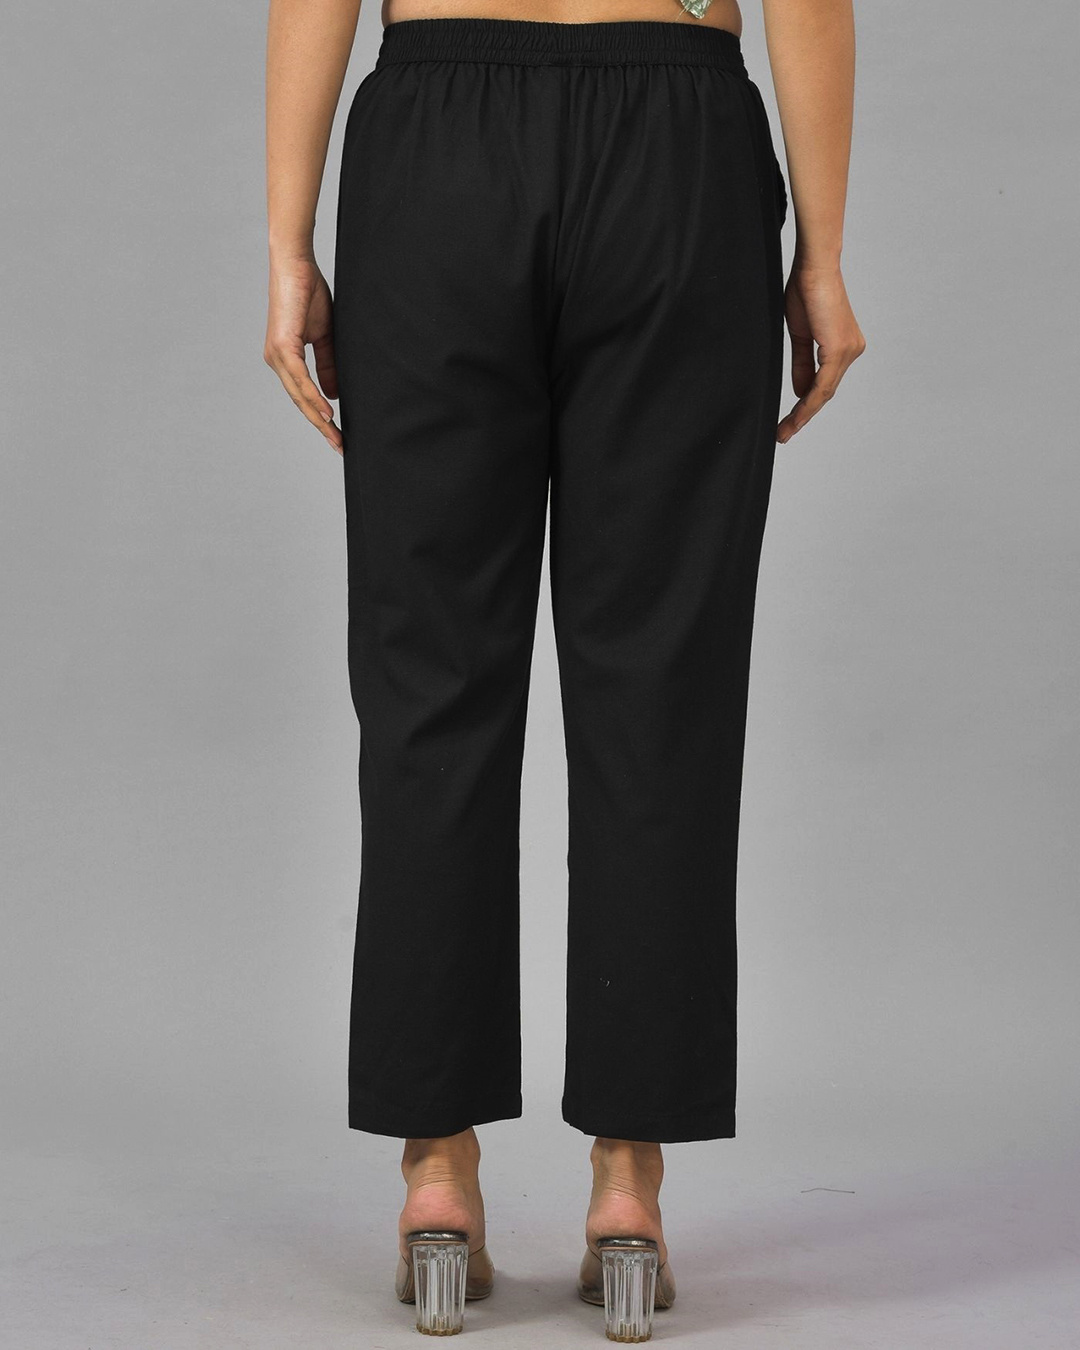 Buy Women's Black Relaxed Fit Casual Pants Online at Bewakoof